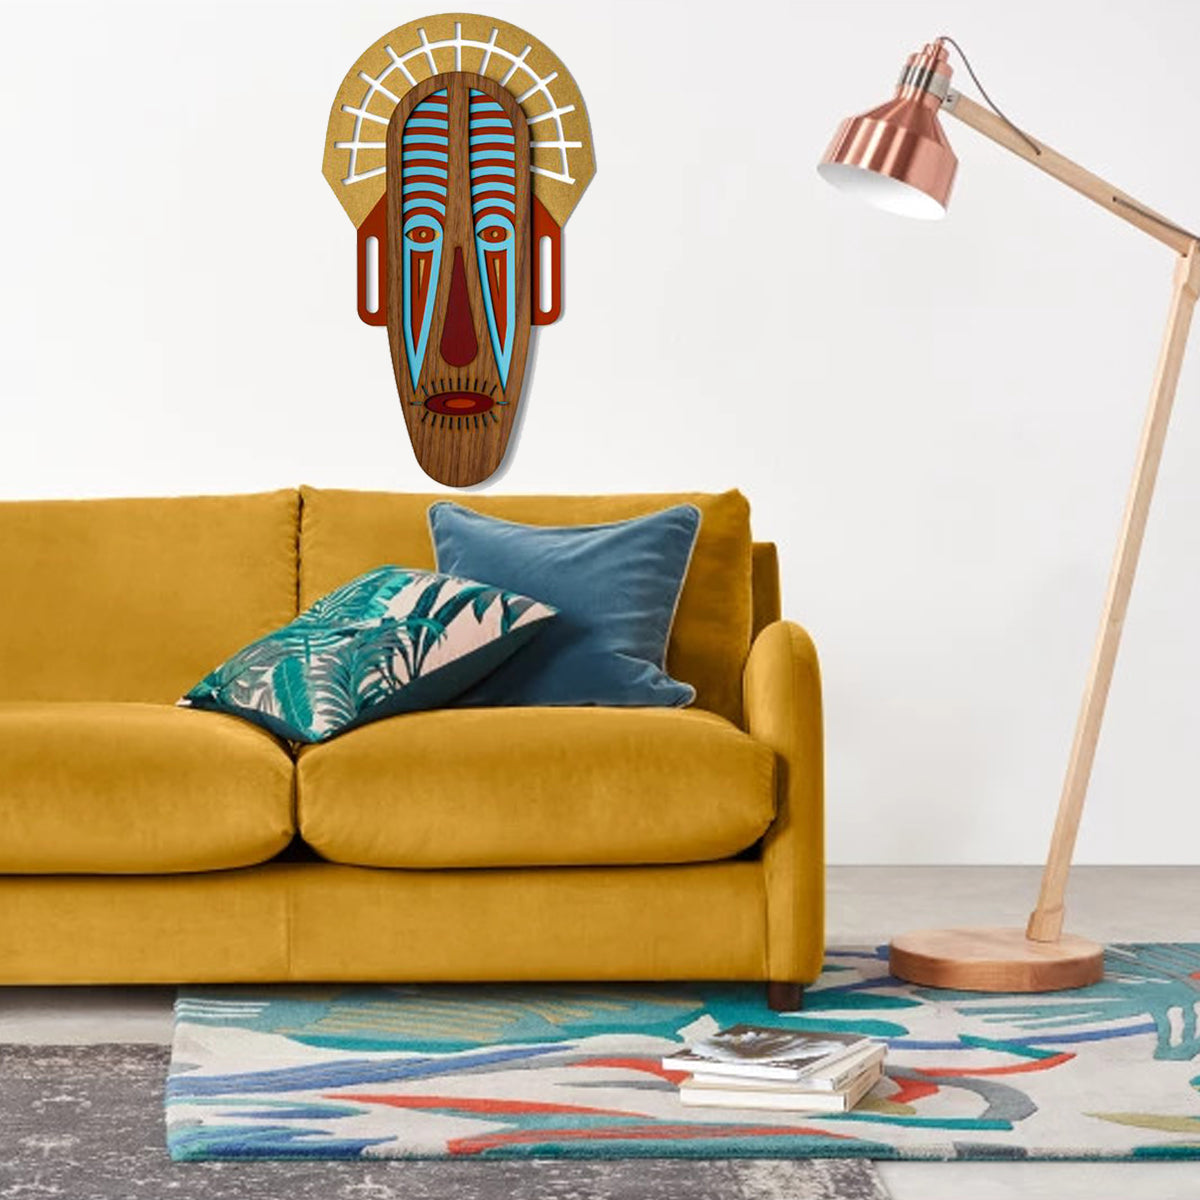 African Masks and Tribal Masks on the Living Room Wall Art by Wooden